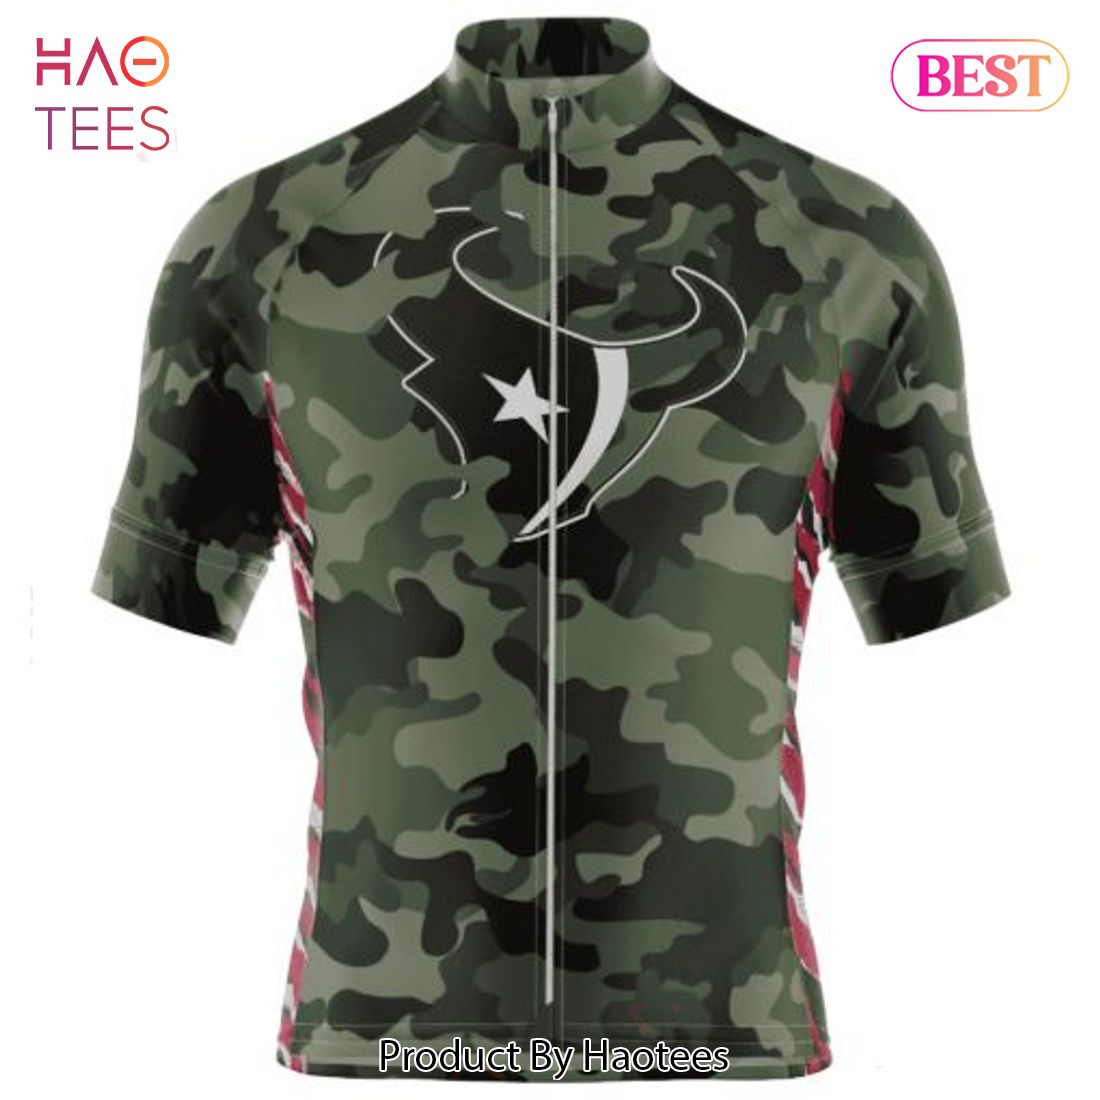 THE BEST NFL Houston Texans Special Camo Design Cycling Jersey Hoodie